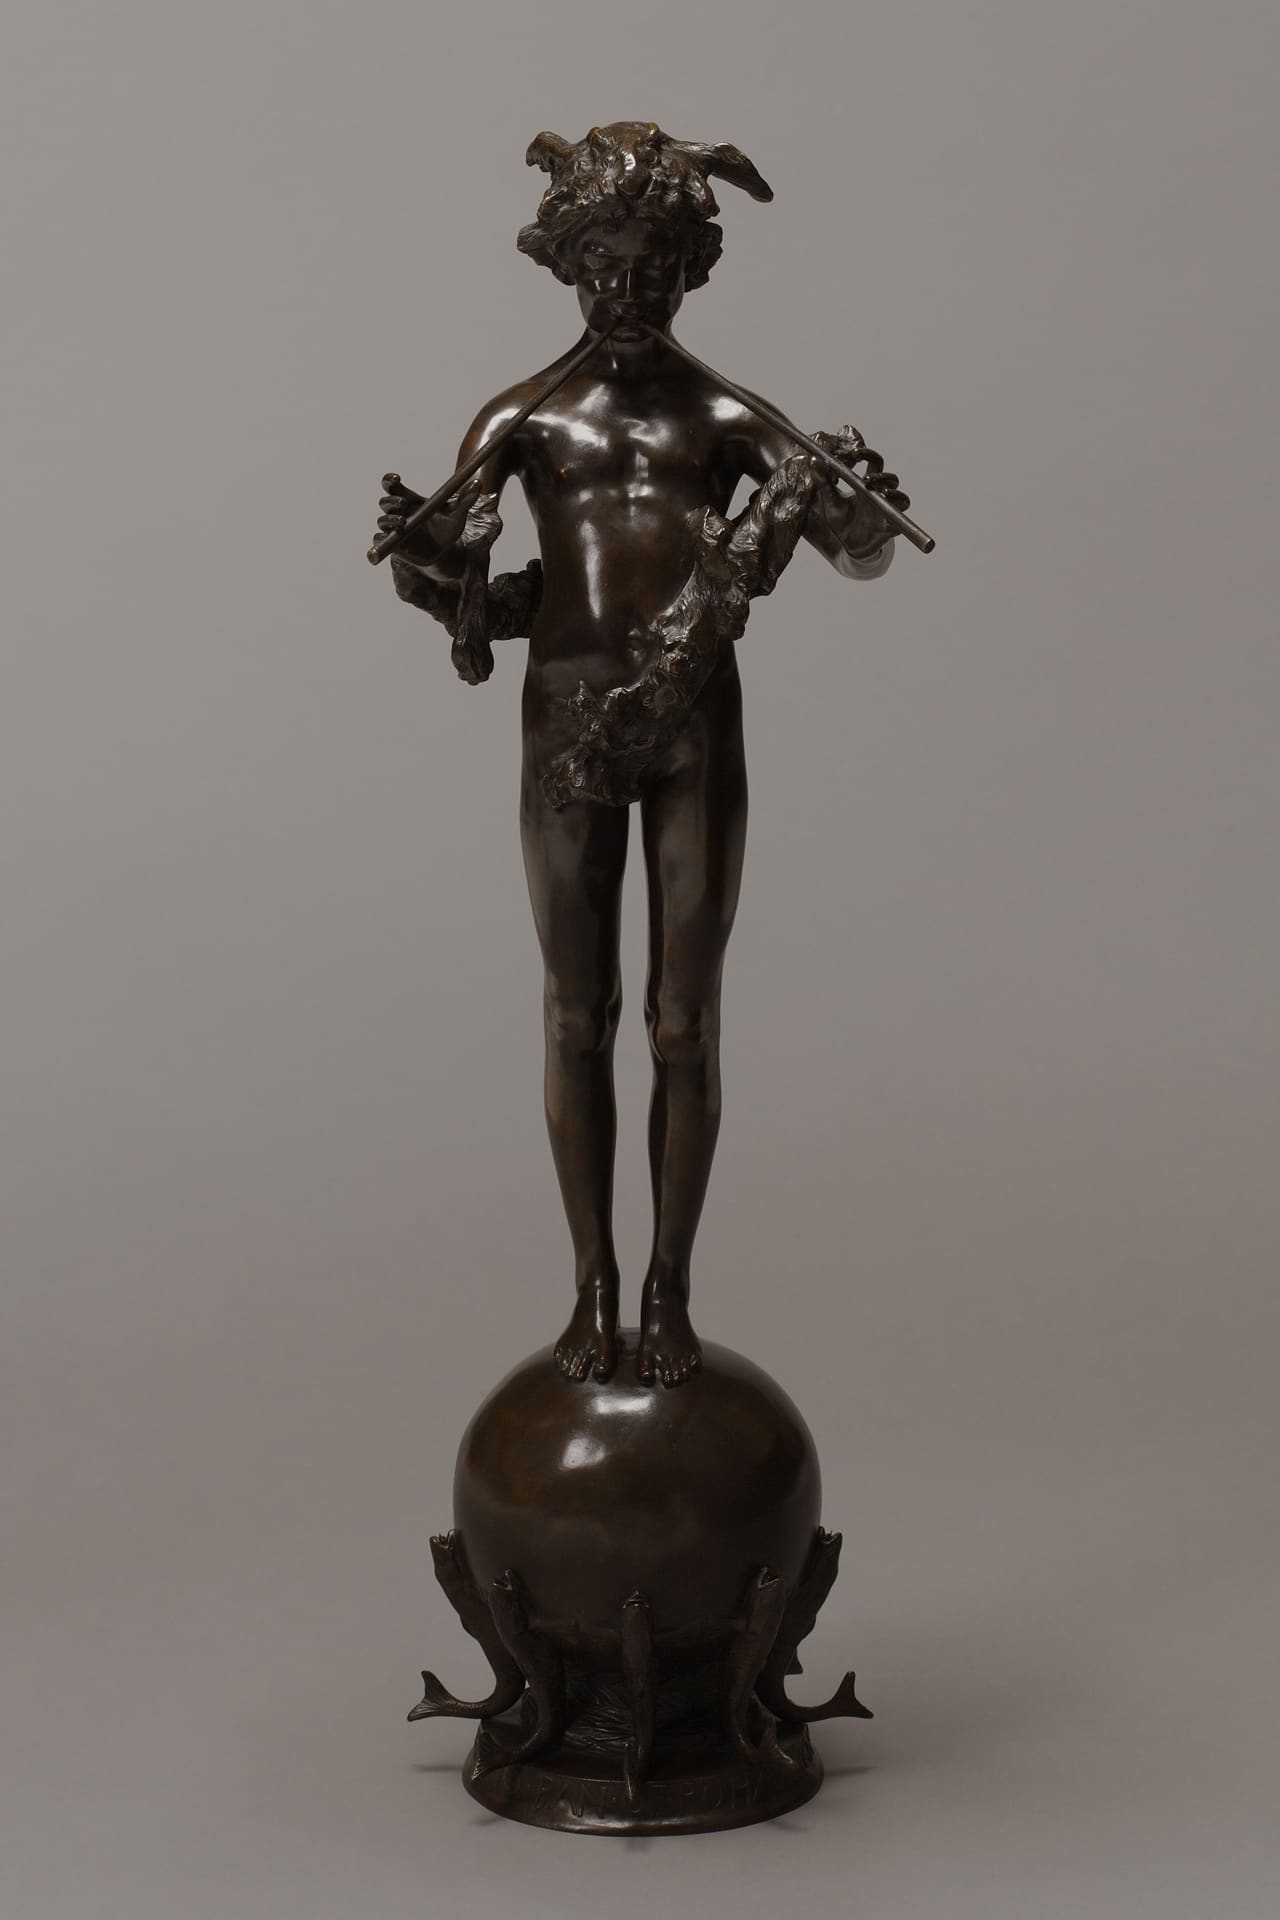 a bronze statue of a young nude boy playing a flute